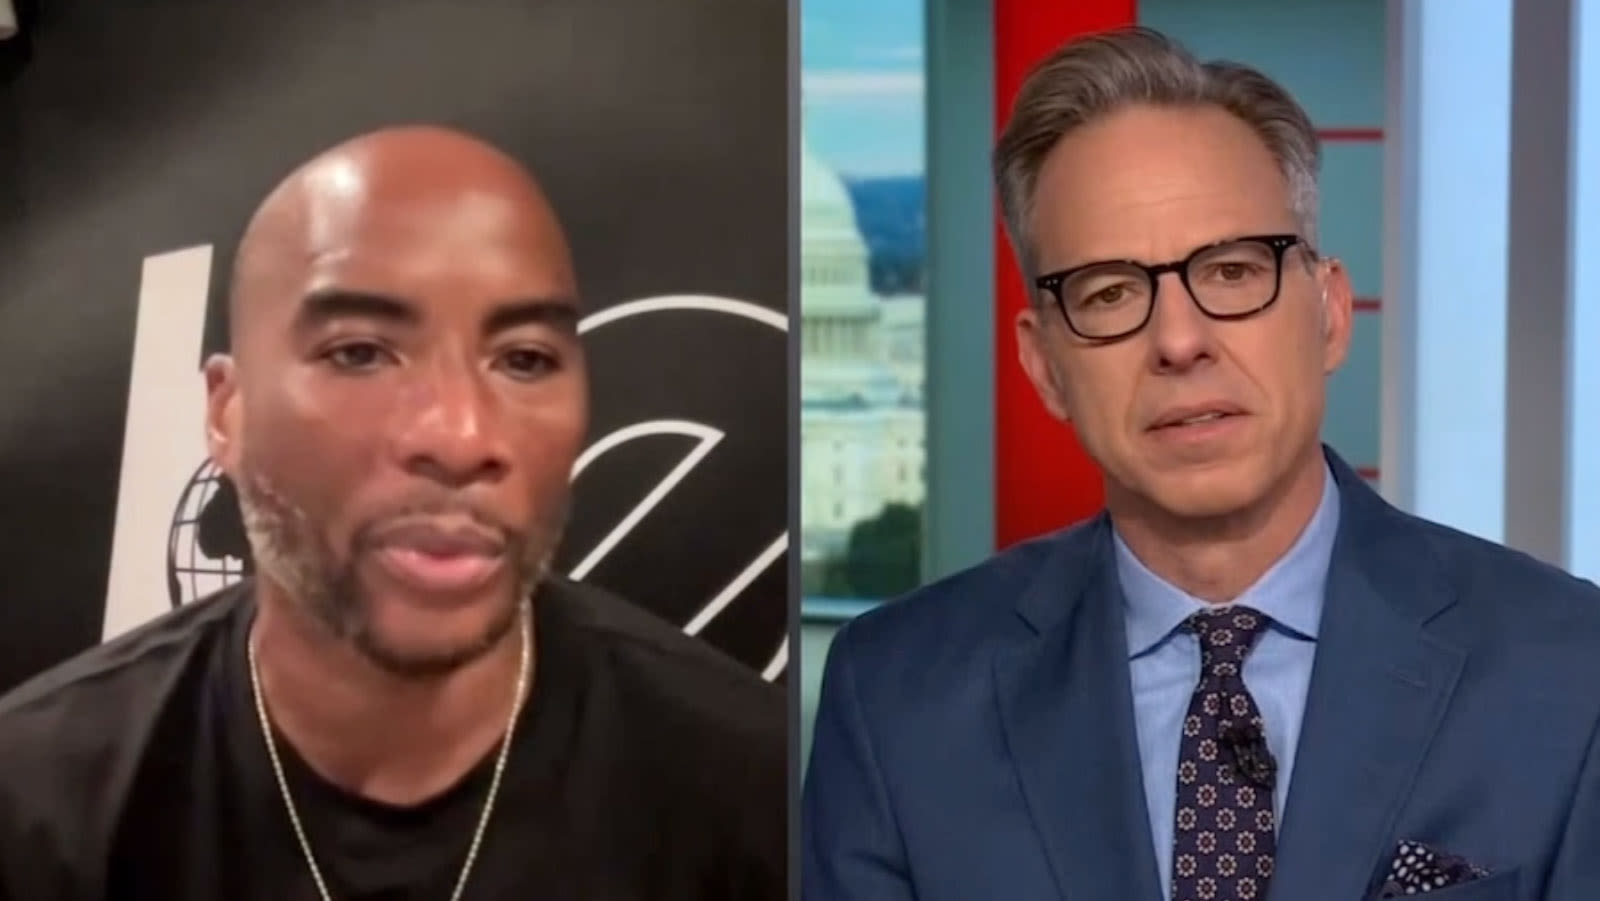 Charlamagne Tha God Calls Out Jake Tapper For “Weird” Question About Kamala Harris; Says CNN & Media Is “Lying To...